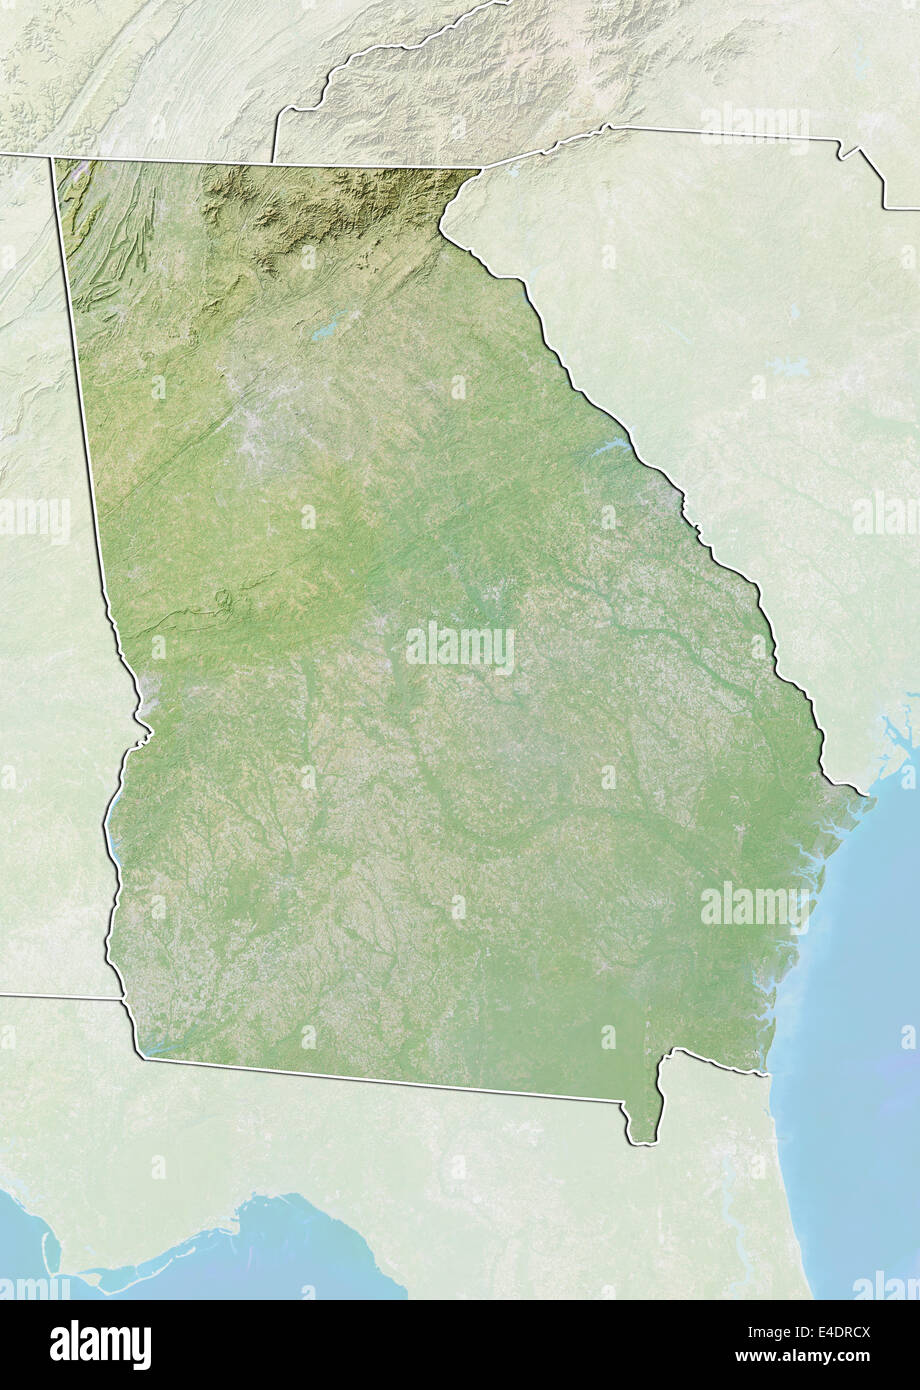 State of Georgia, United States, Relief Map Stock Photo - Alamy